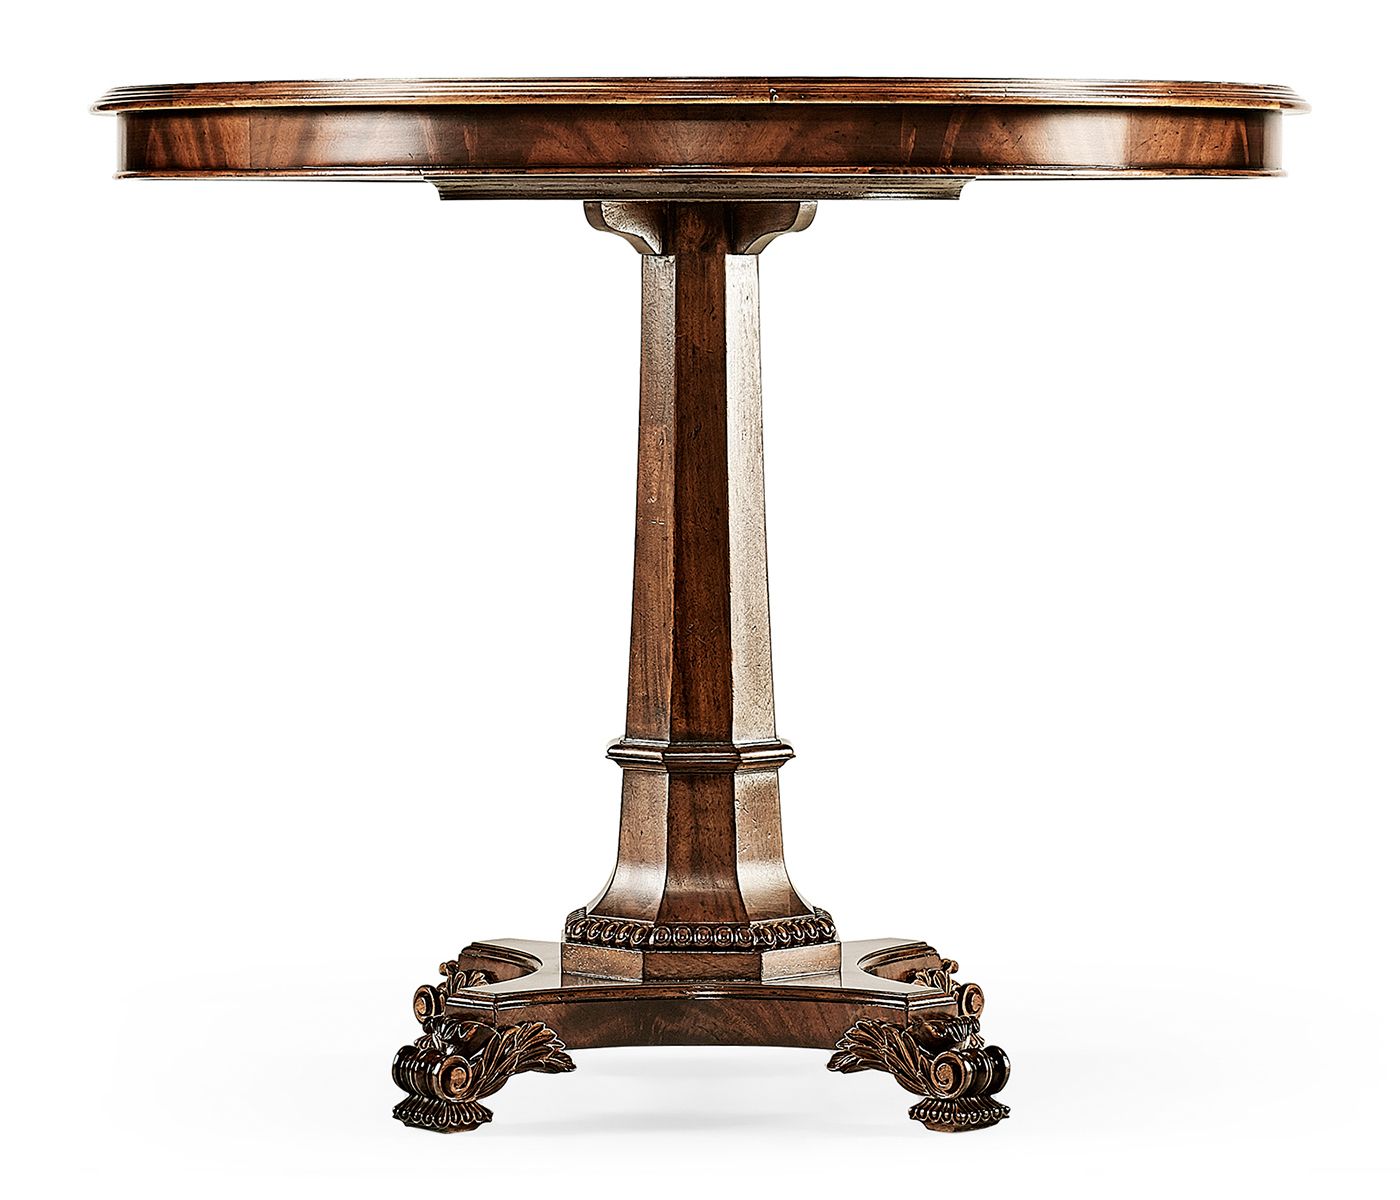 Regency Octagonal Pier Table With Regard To Octagon Console Tables (View 11 of 20)